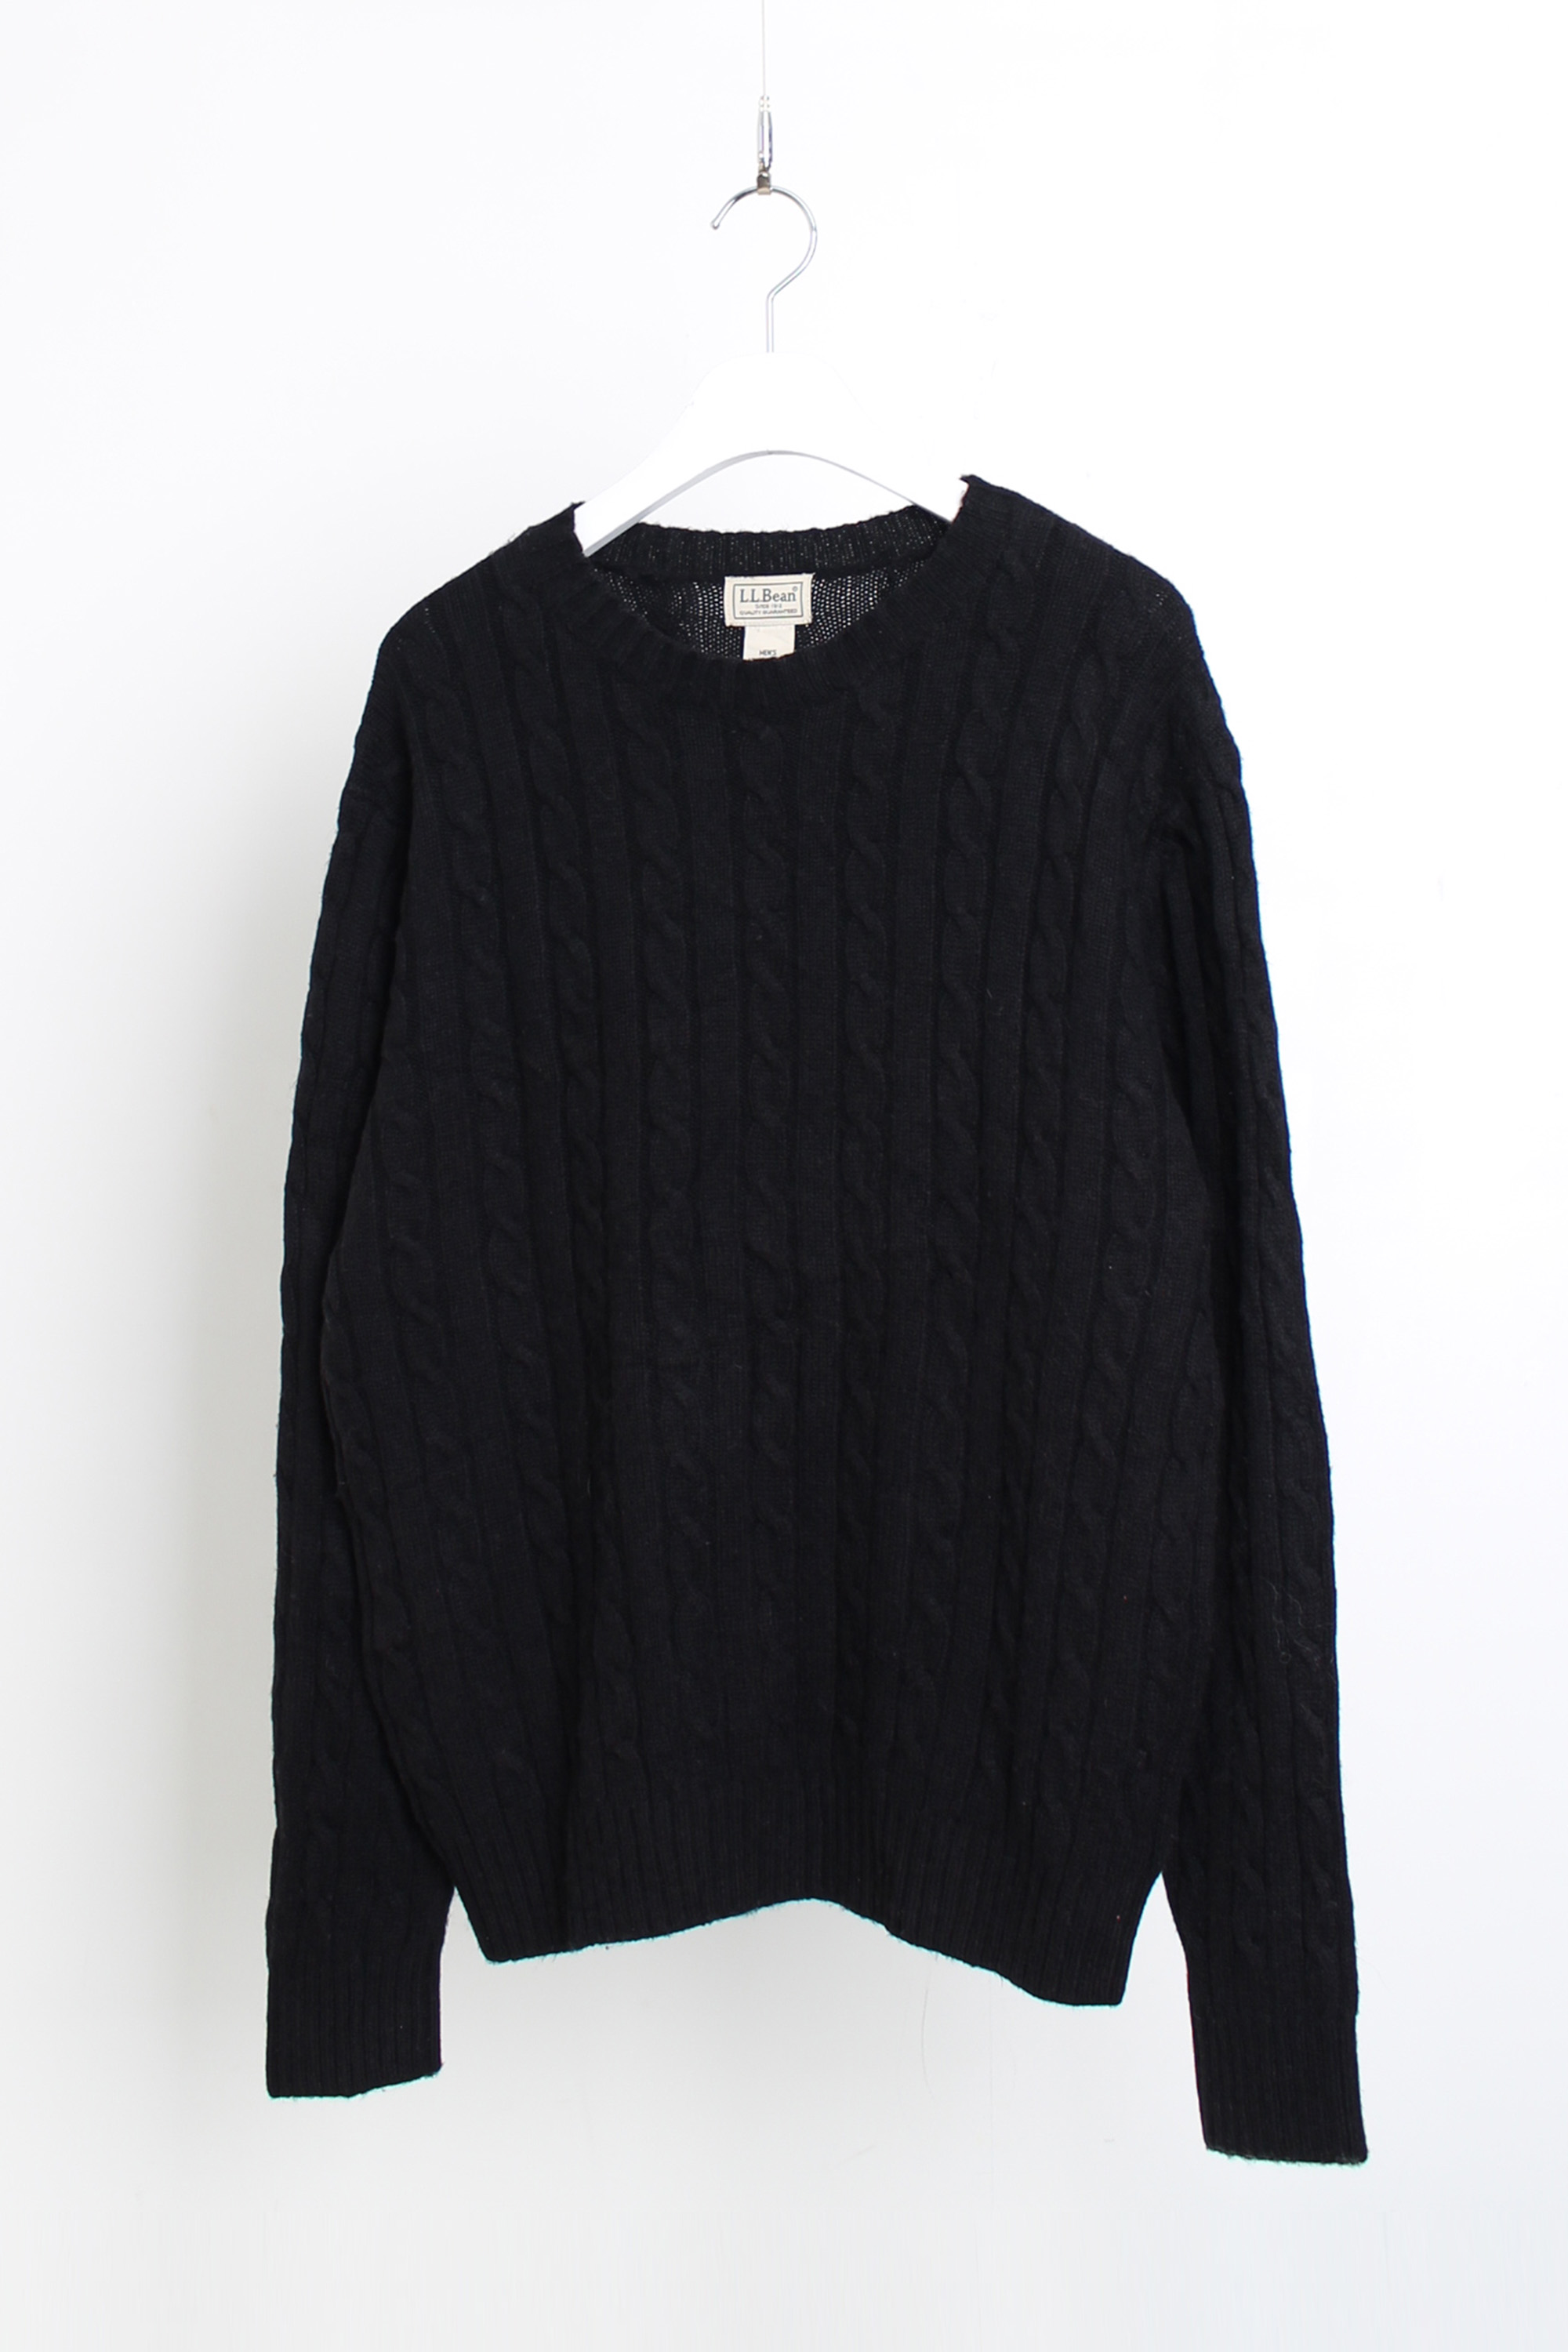 LL BEAN cable knit